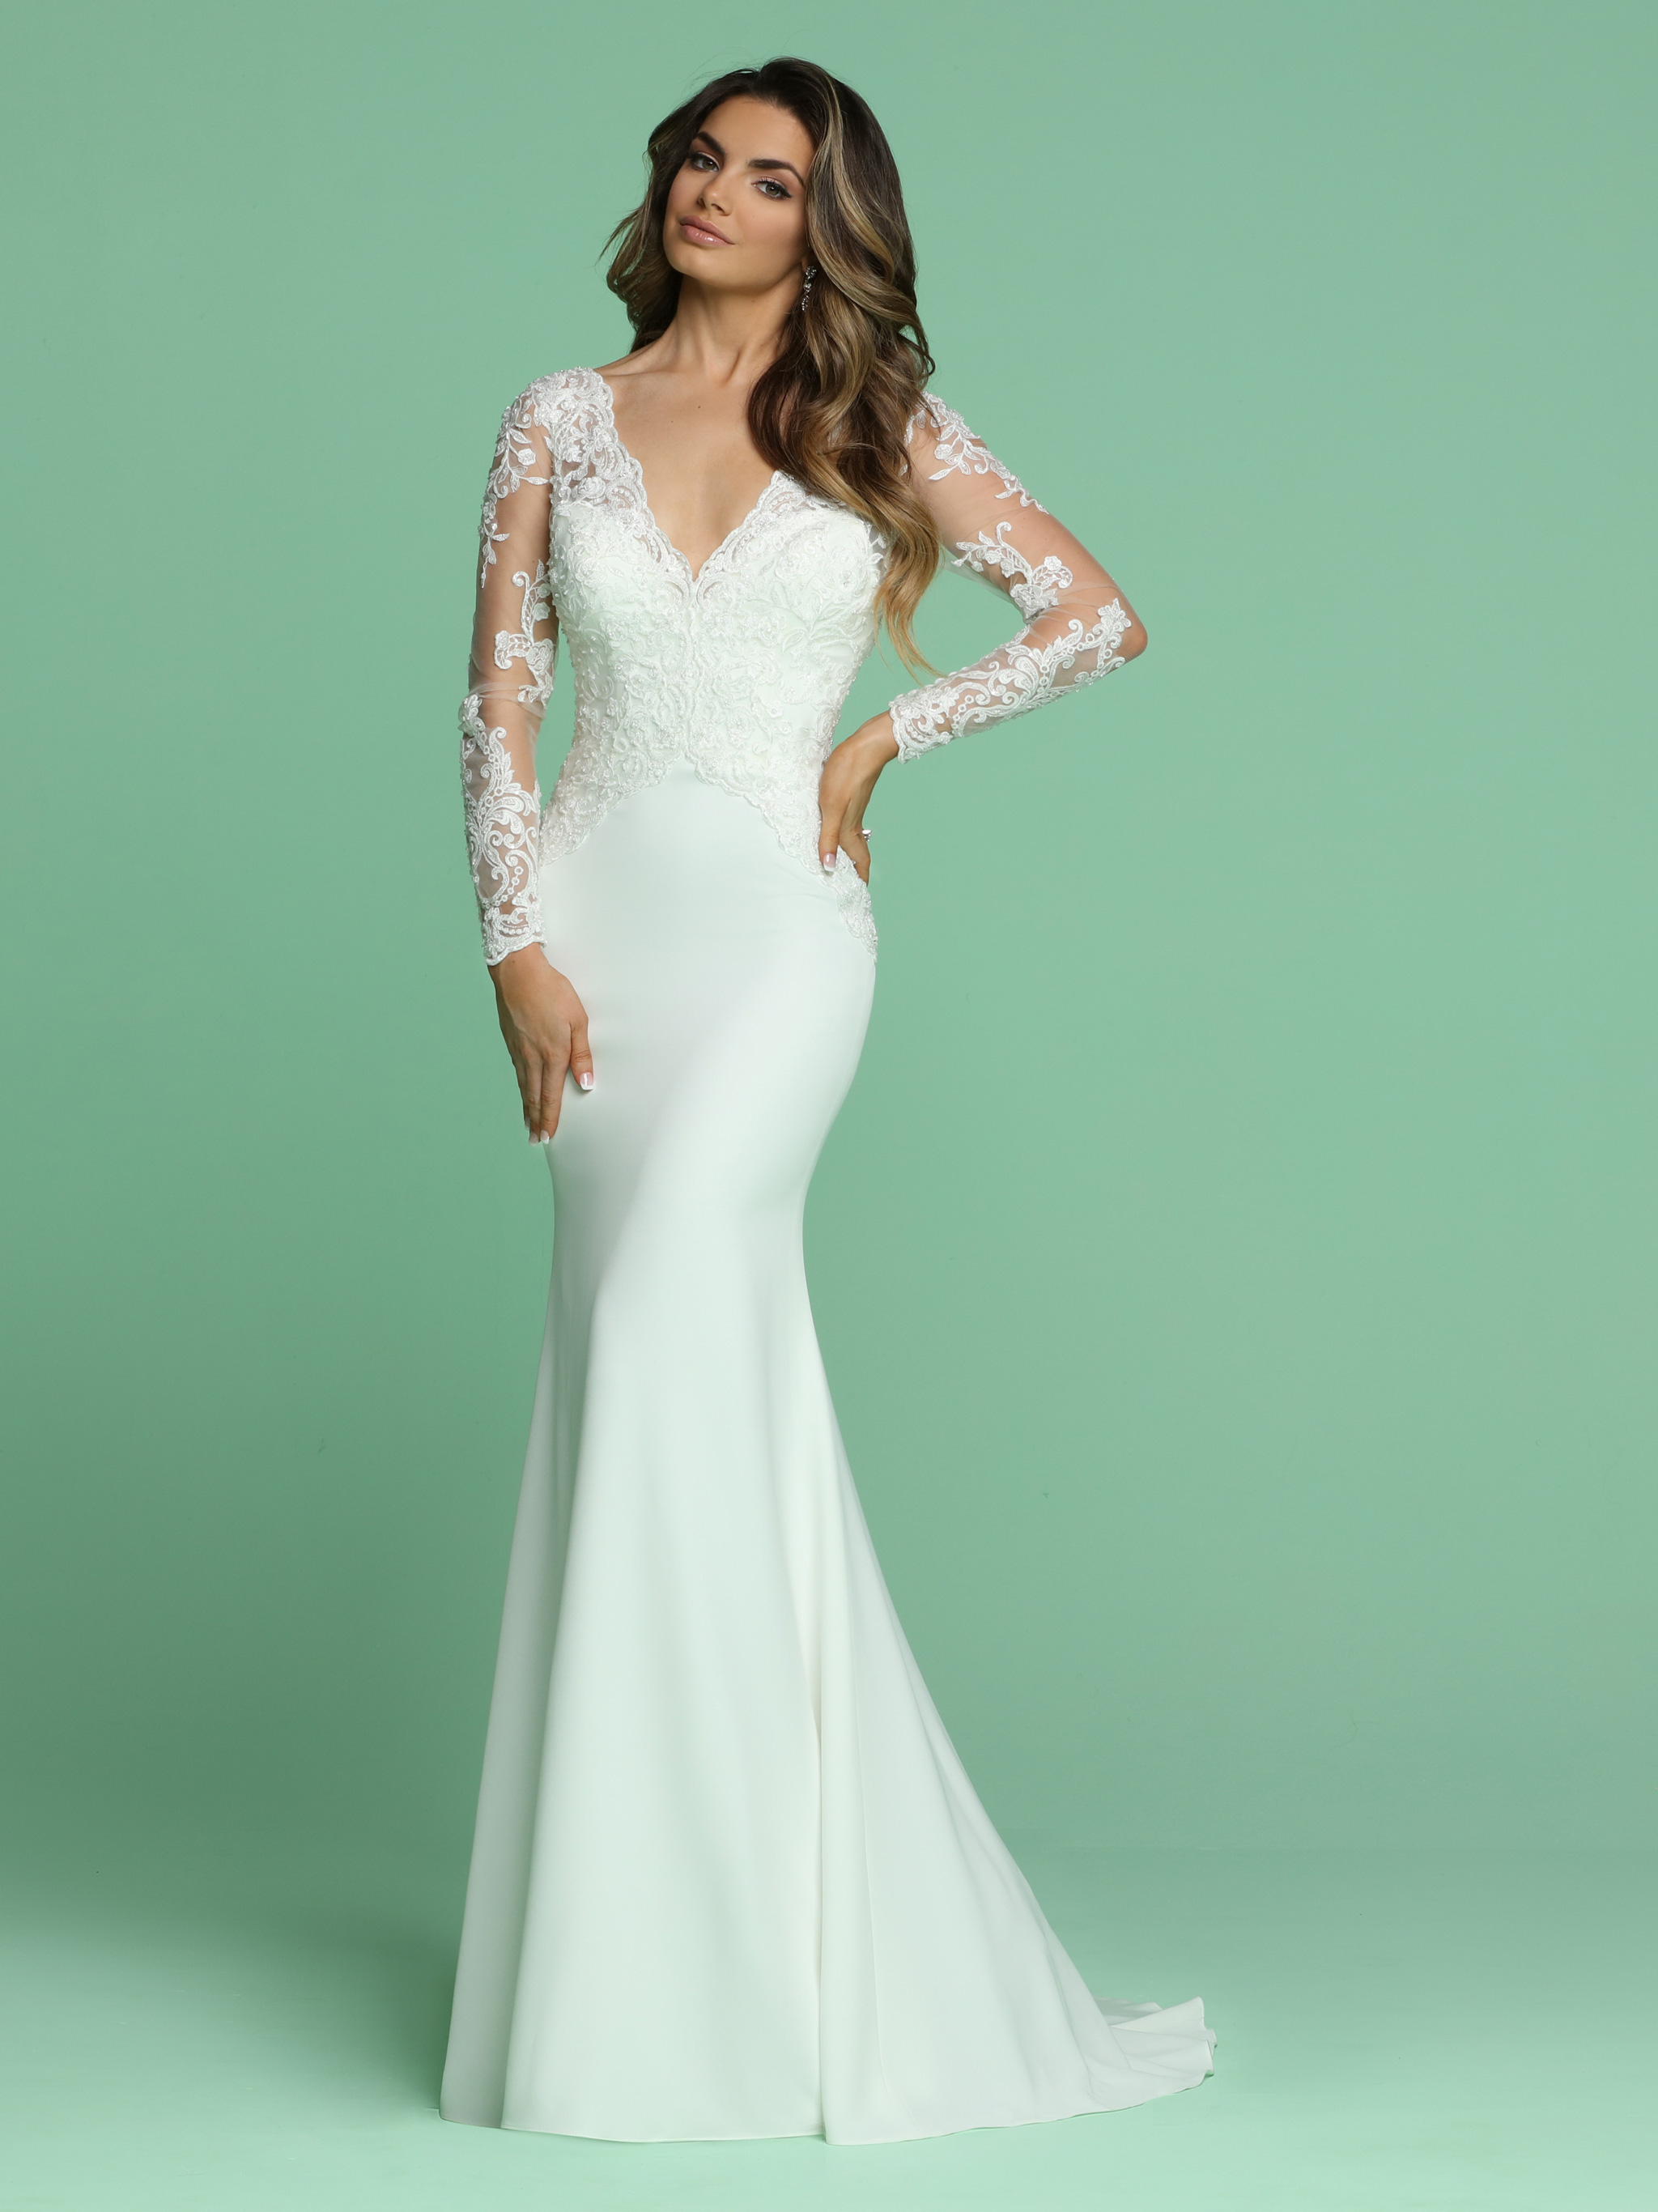 How to Choose Your Wedding Dress by Body Type: 6 Important Tips